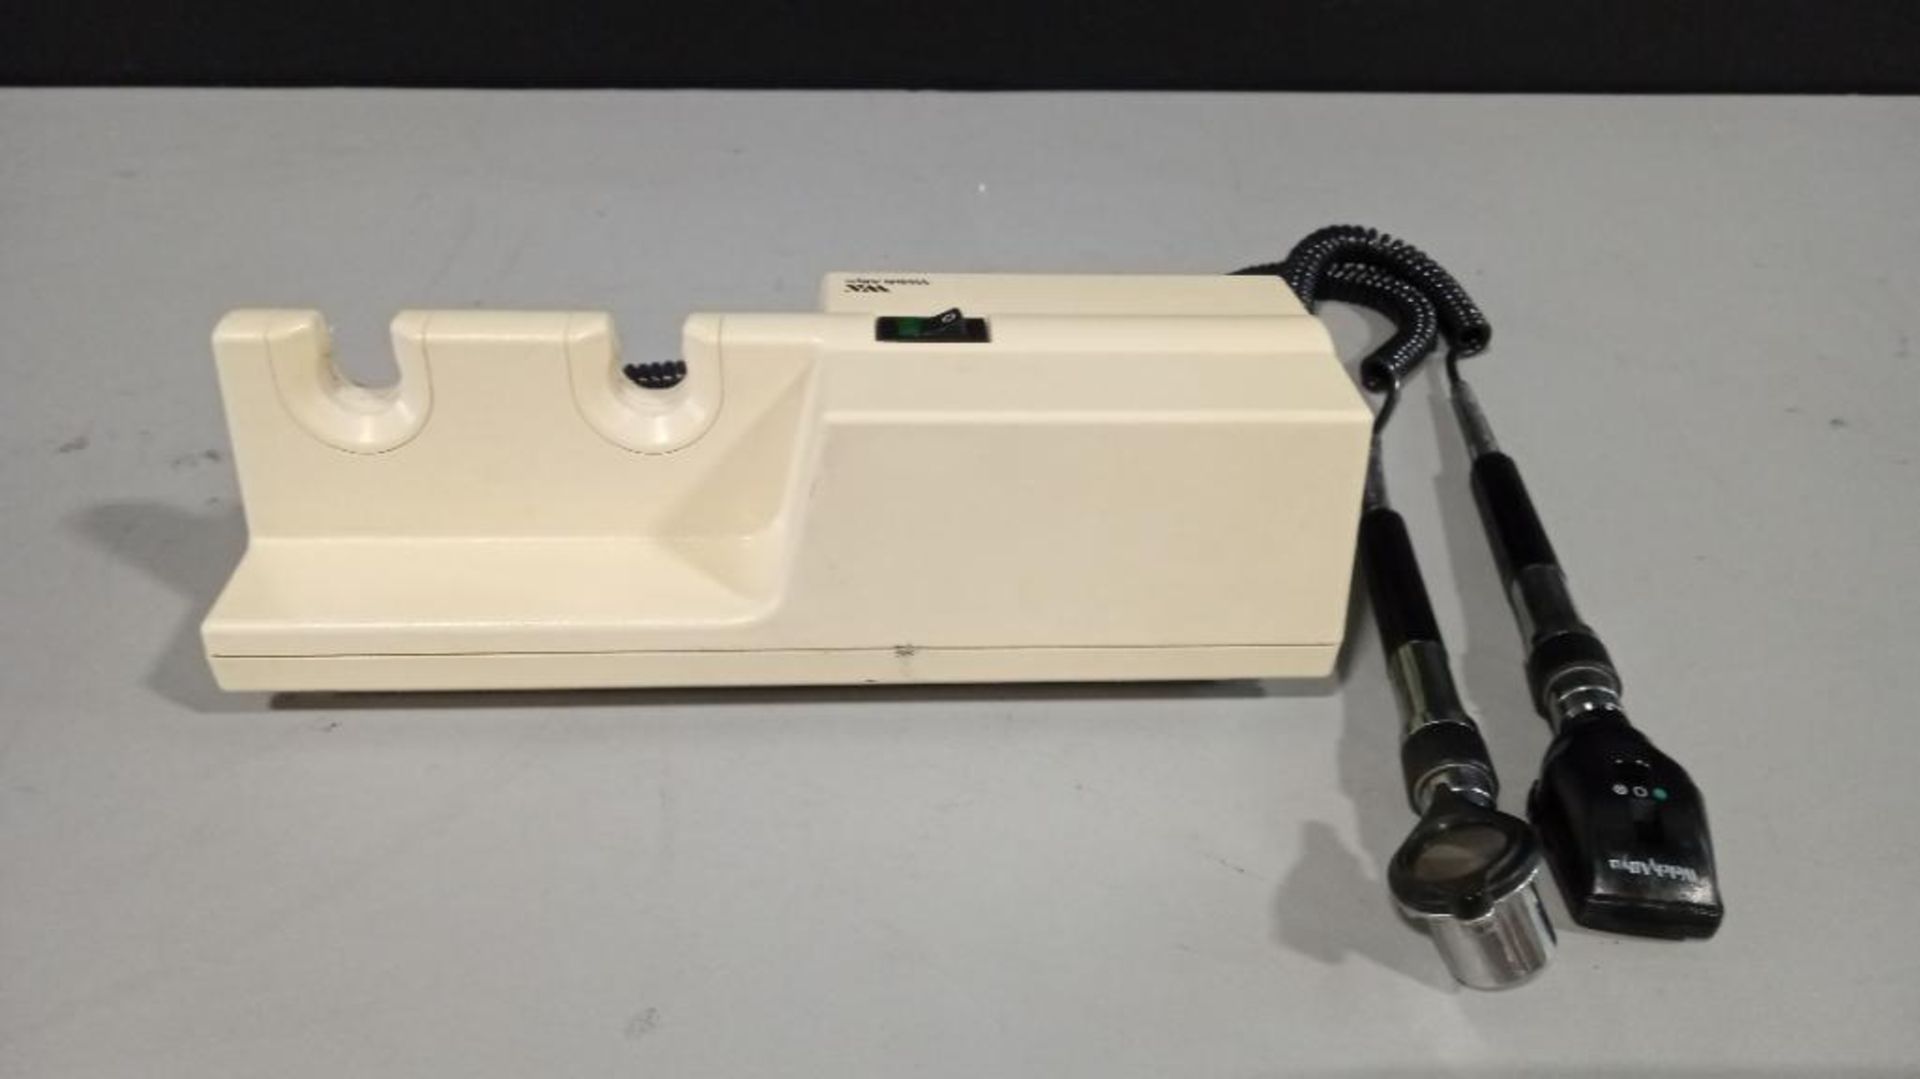 WELCH ALLYN 767 SERIES OTO/OPTHALMOSCOPE WITH HEADS